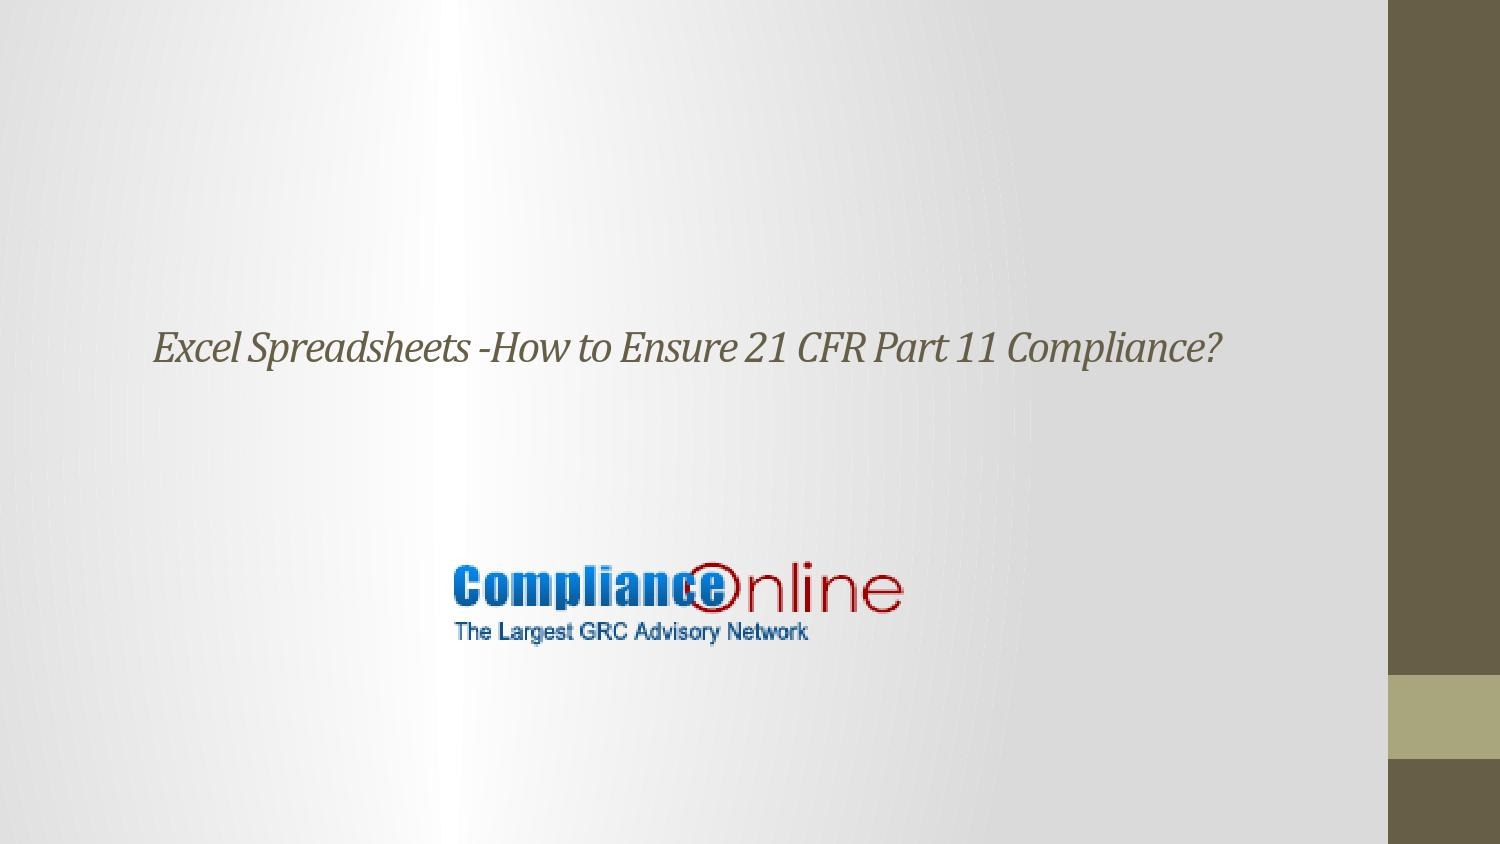 21 Cfr Part 11 Compliance For Excel Spreadsheets Pertaining To Excel Spreadsheets How To Ensure 21 Cfr Part 11 Compliance